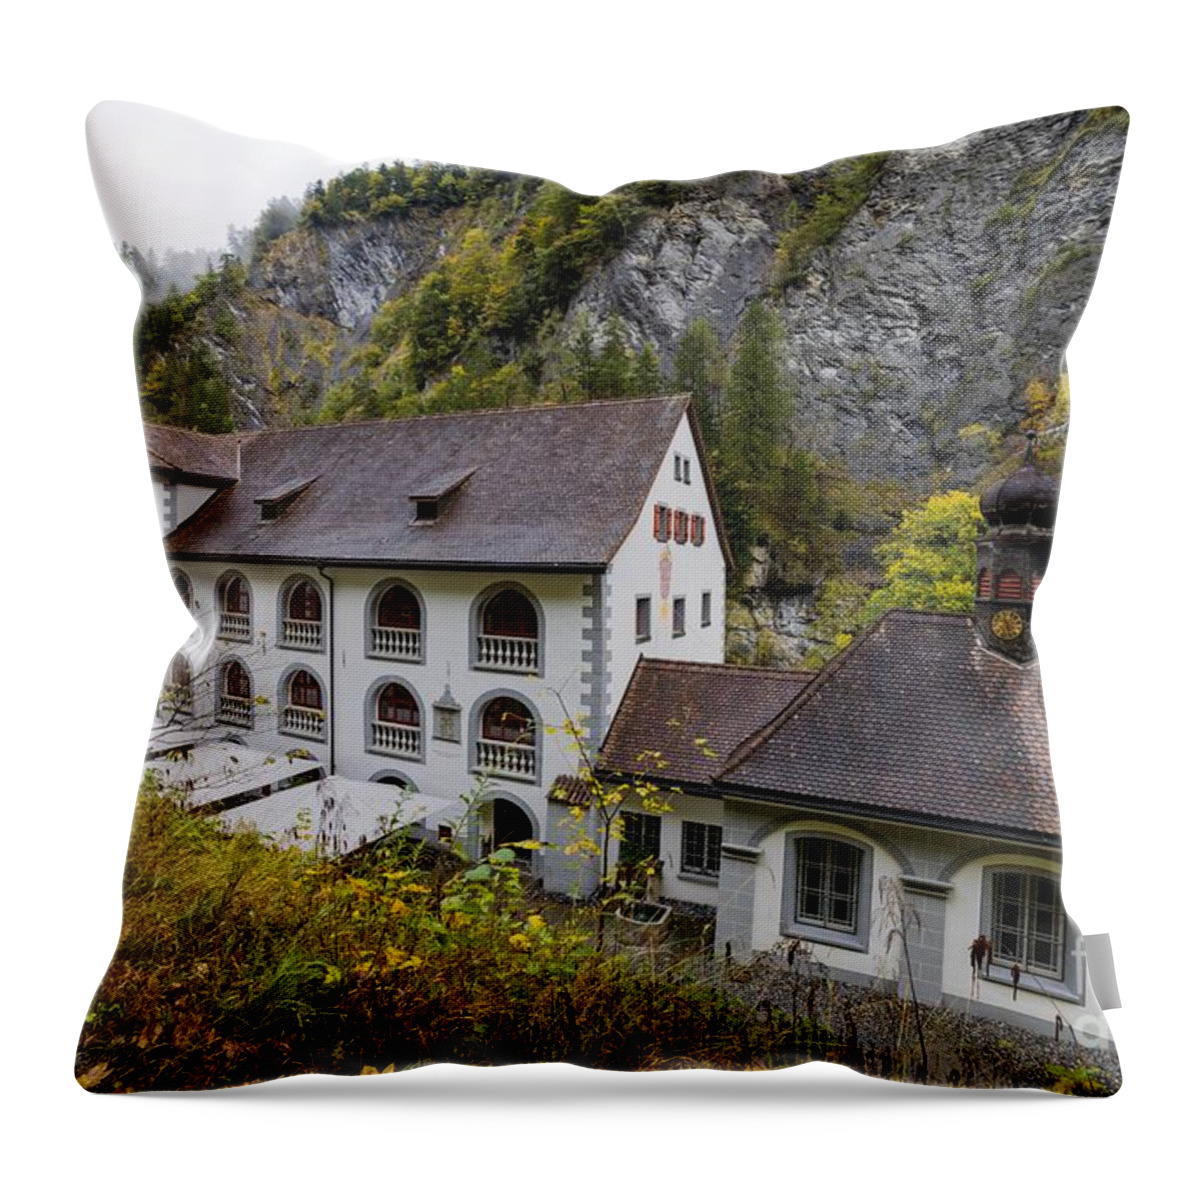 Building Throw Pillow featuring the photograph The Old Bath House of Pfaefers by Eva Lechner